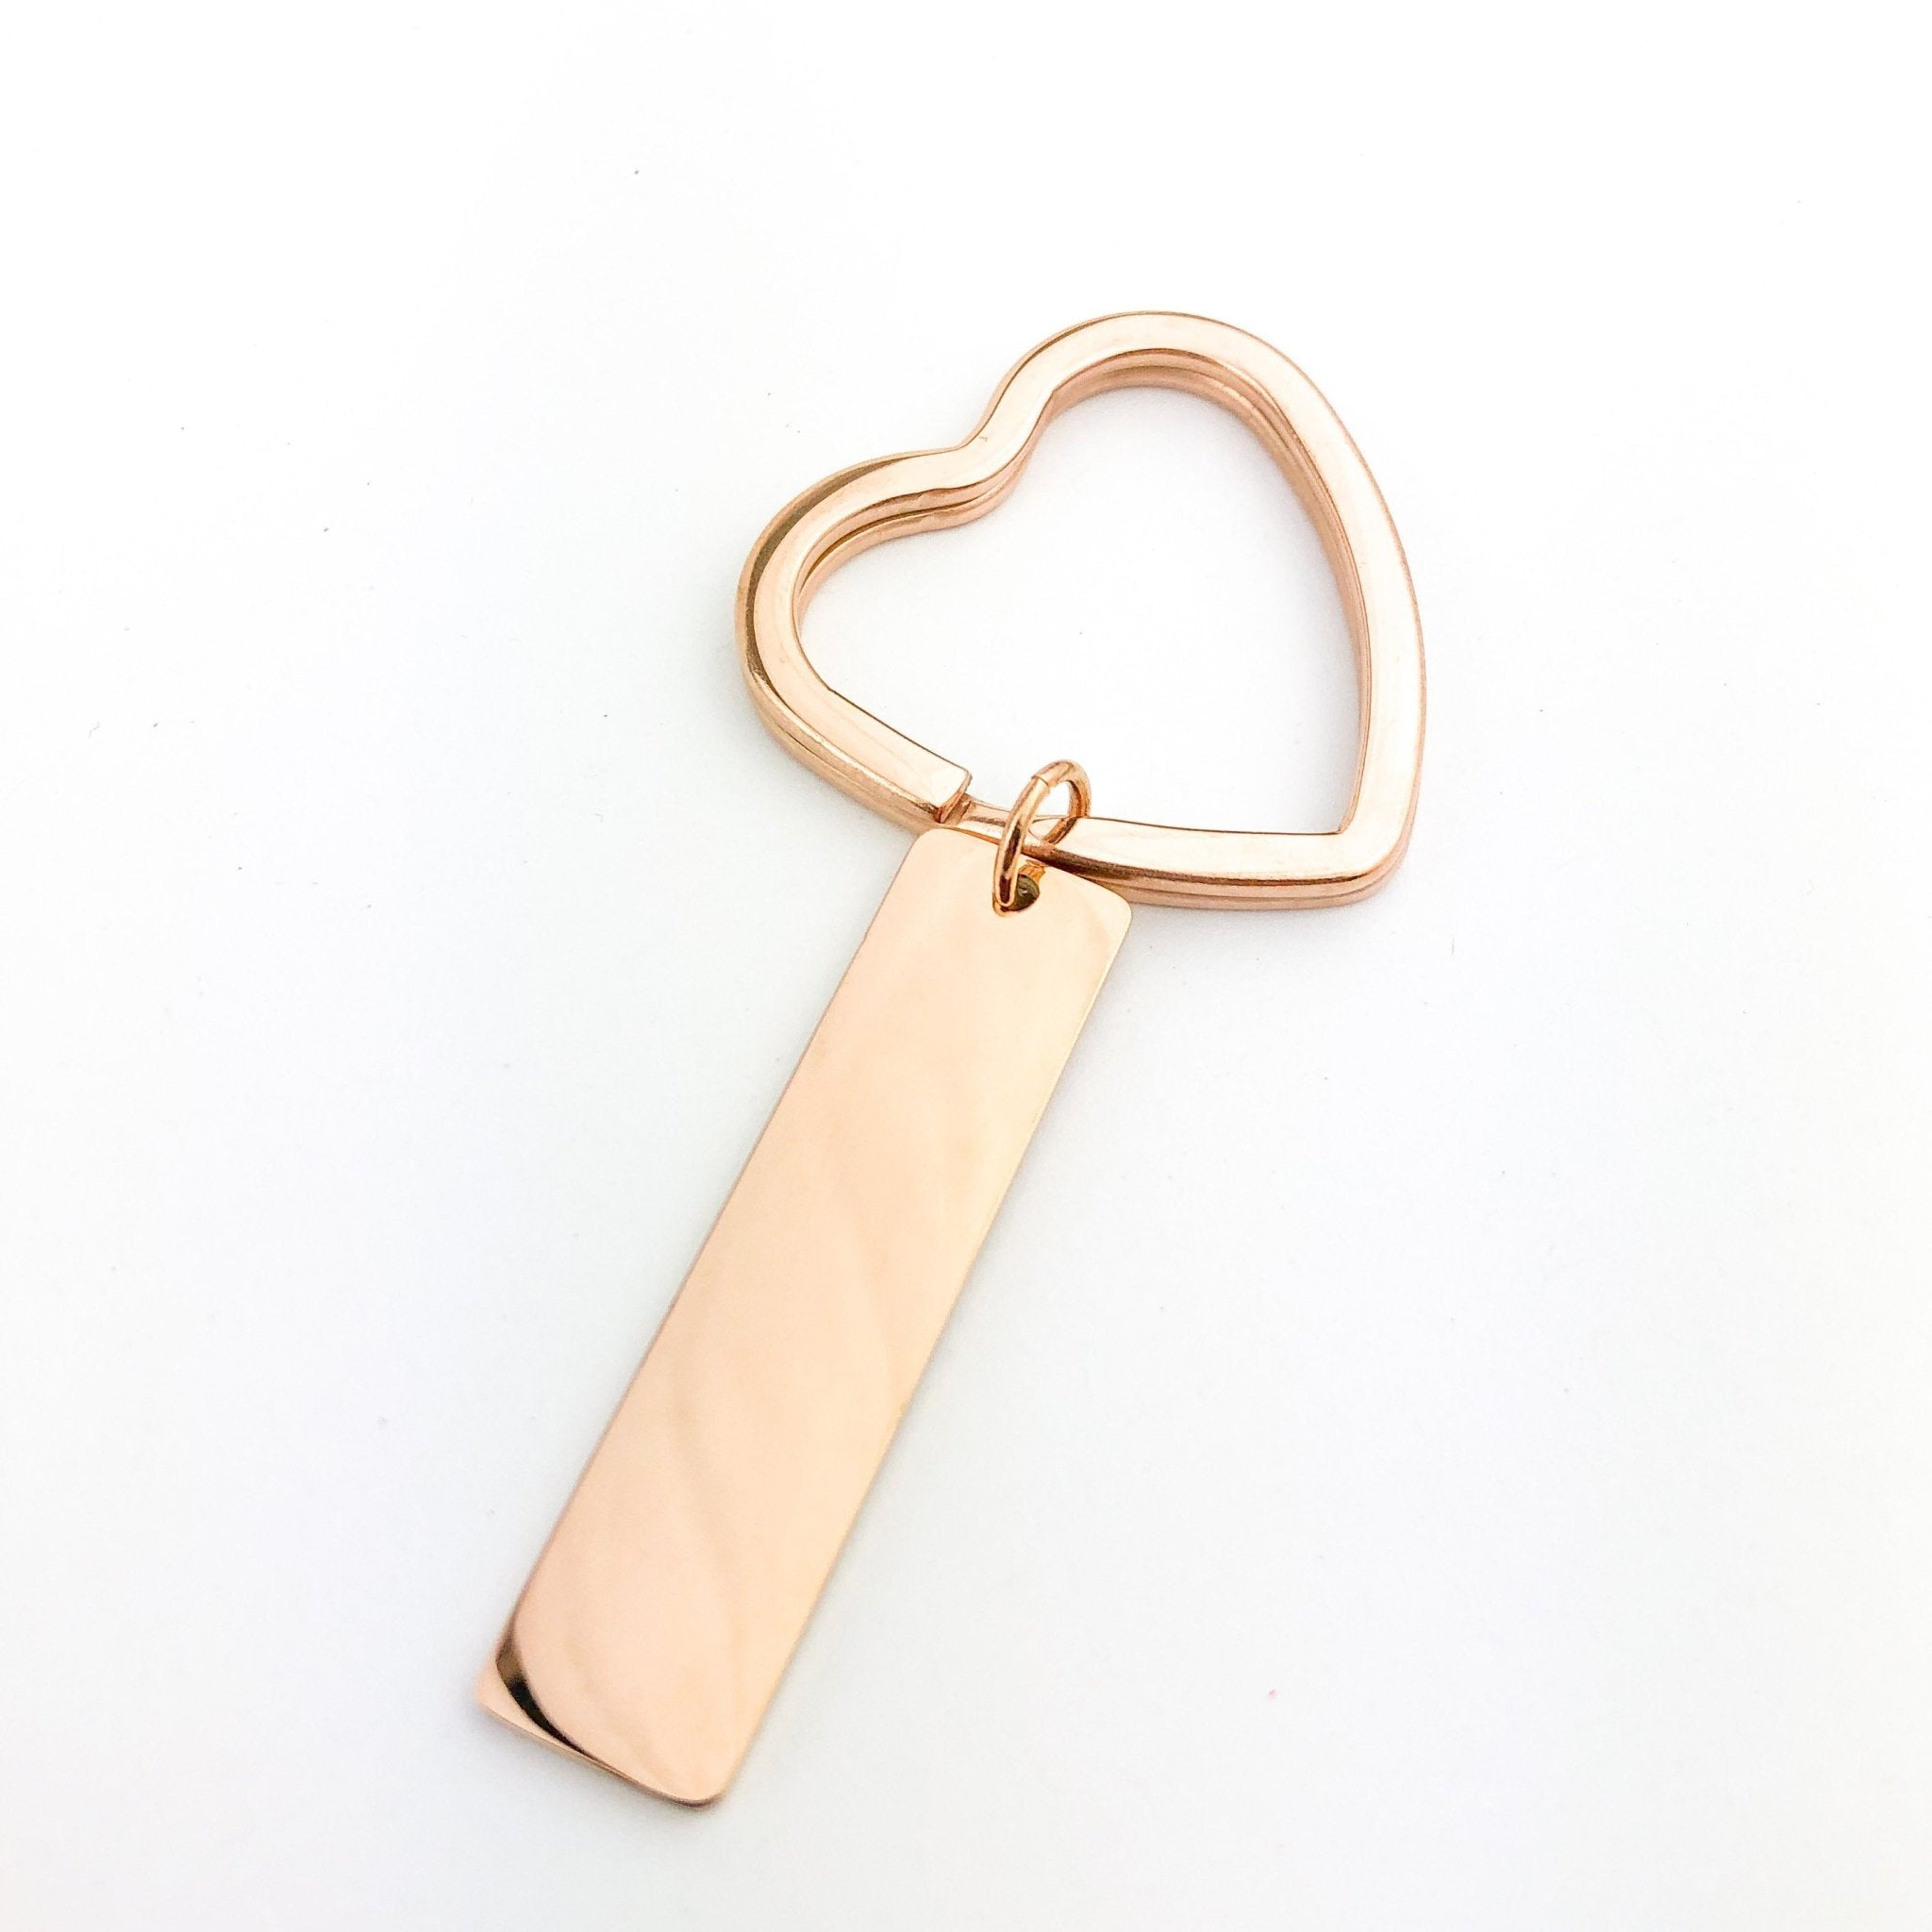 Customized Heart Key Chain - Flaire & Co.